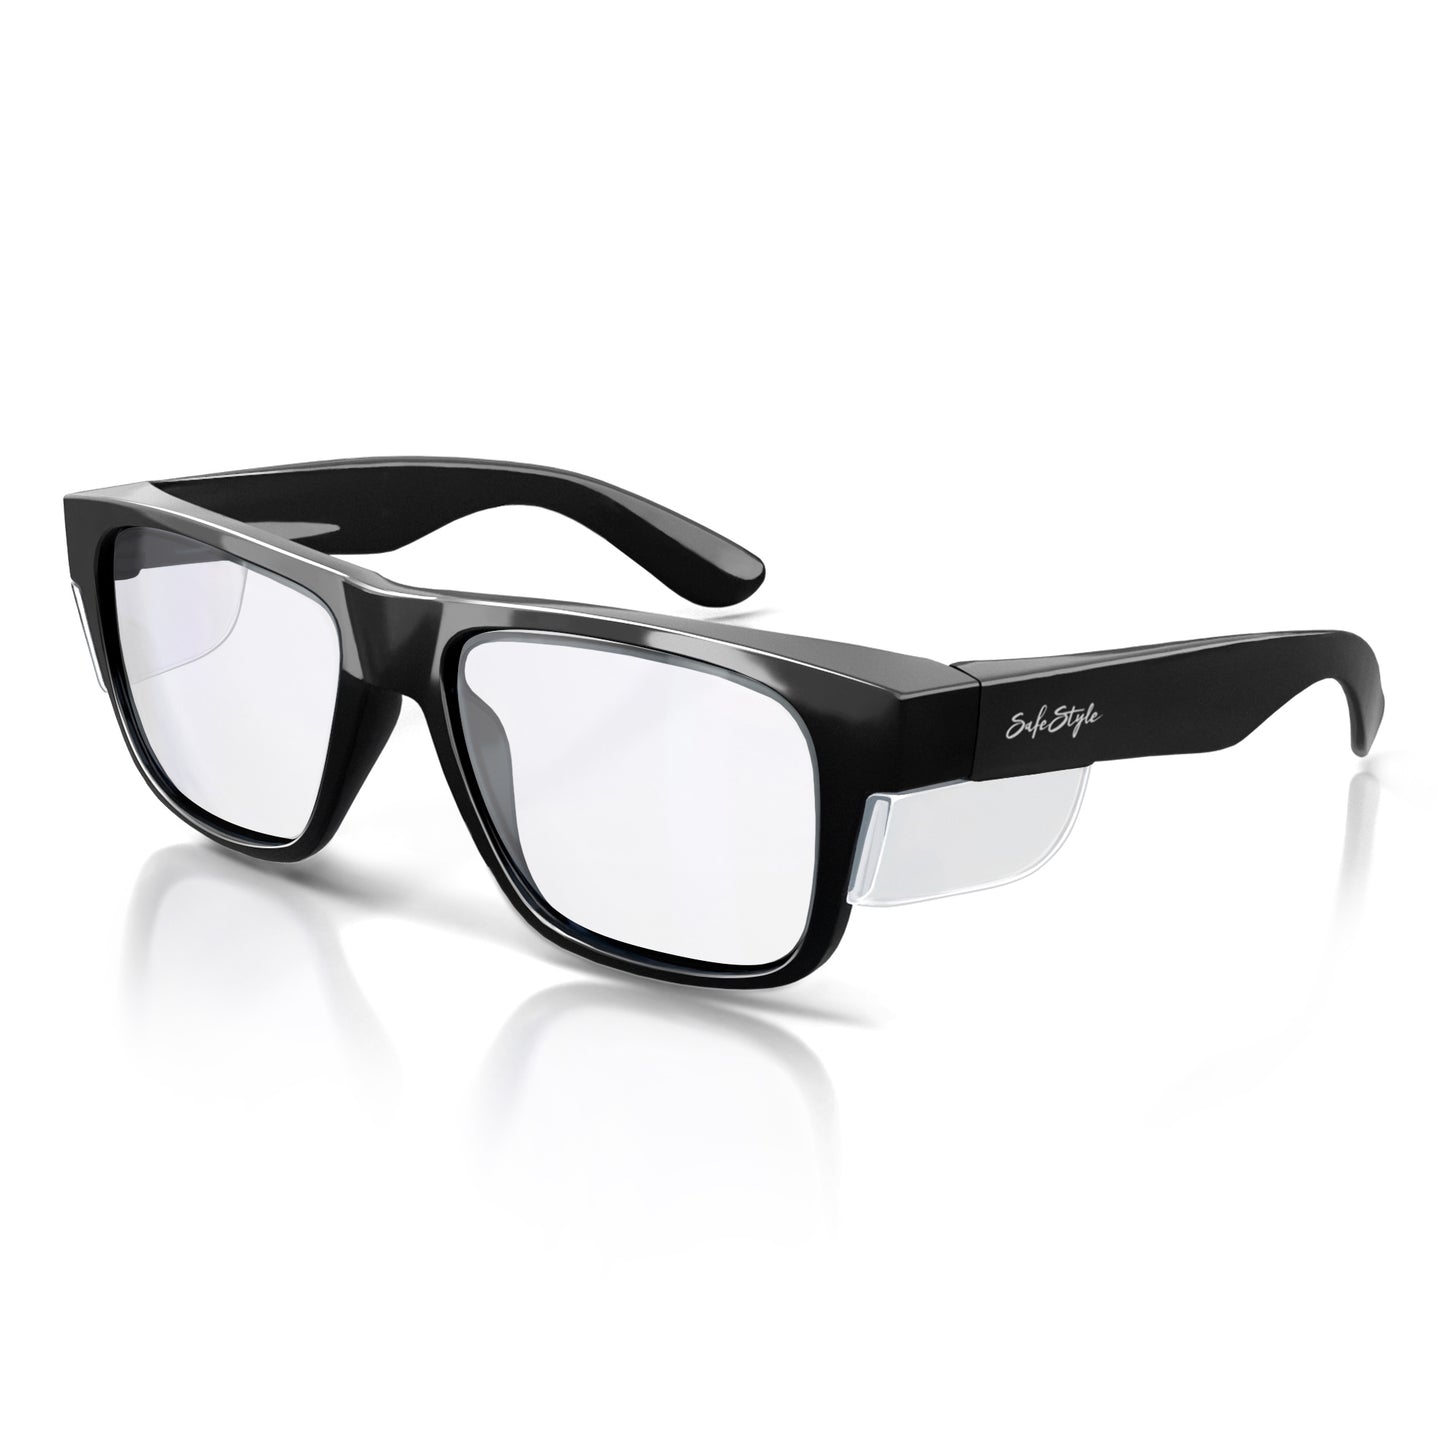 SafeStyle Fusions Black Frame/Clear UV400